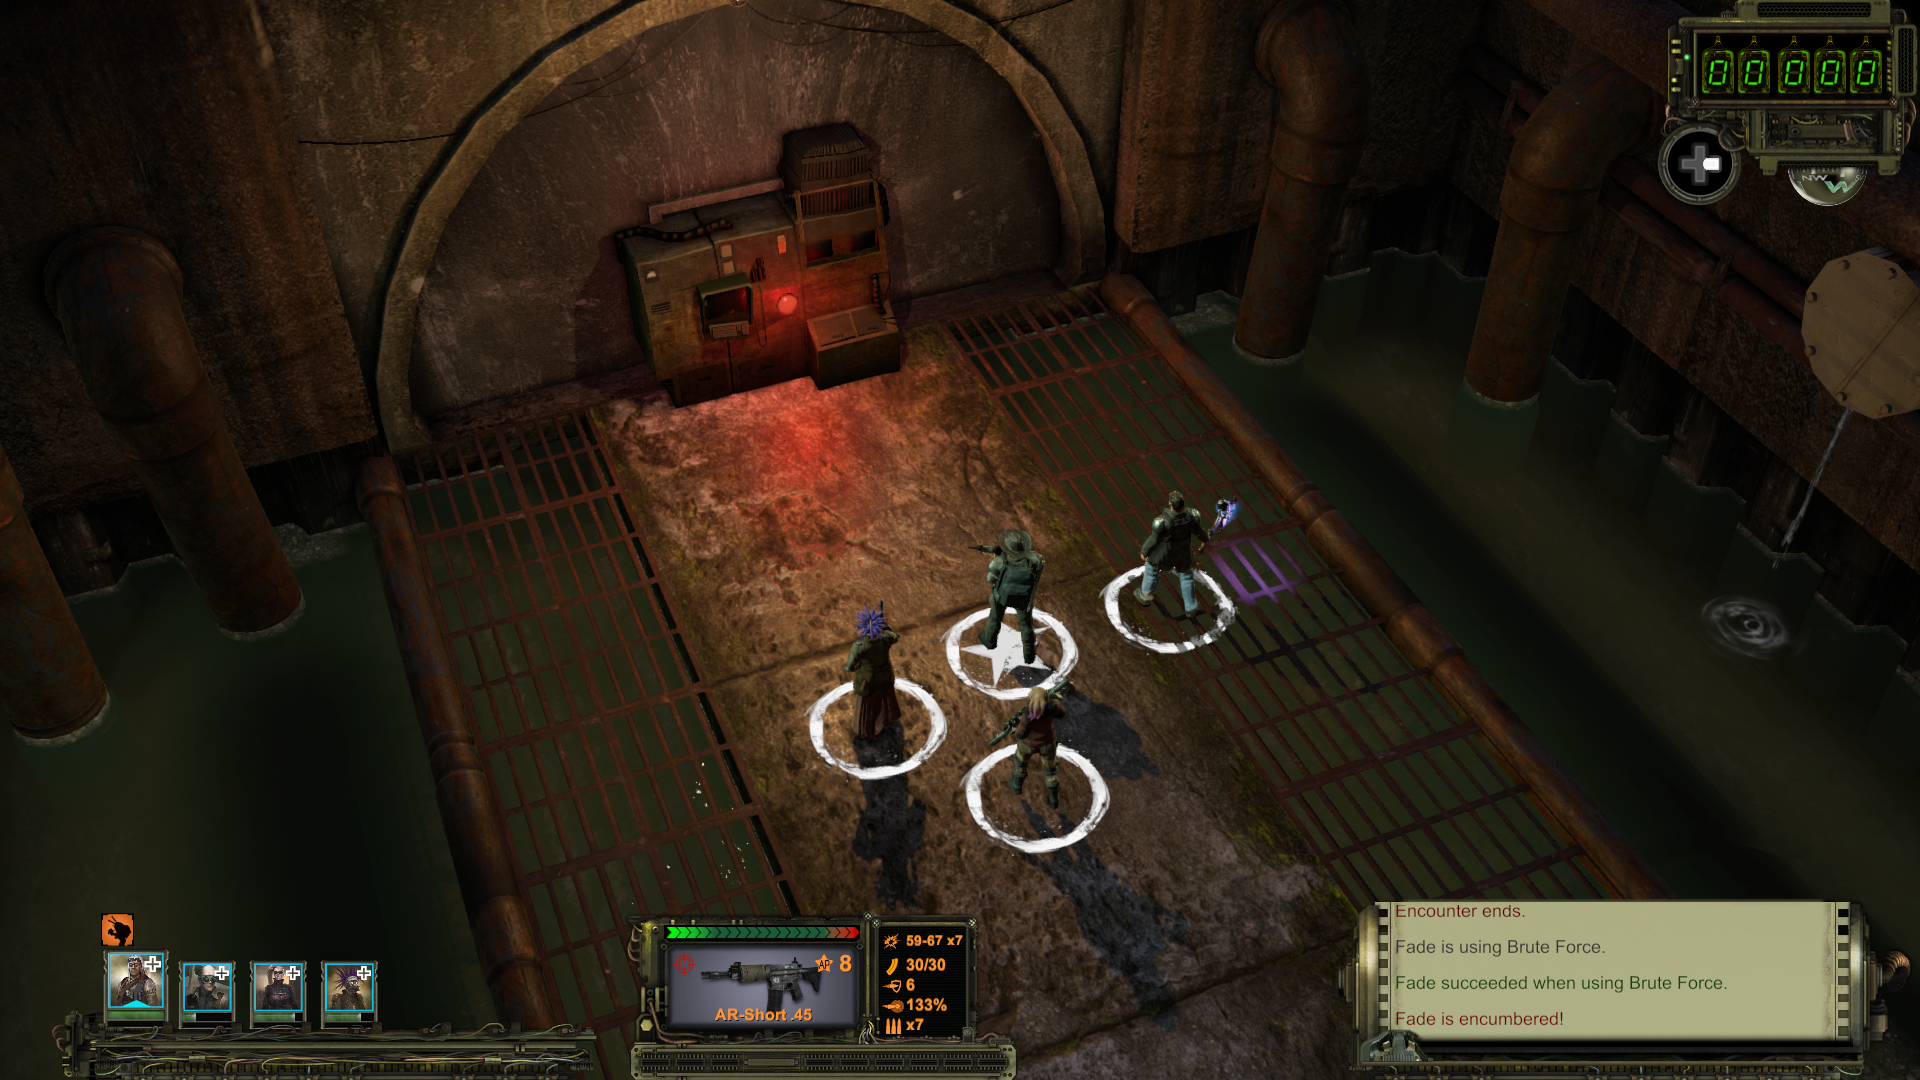 It Took A Year To Find Out What The Red Button In Wasteland 2 Actually Does